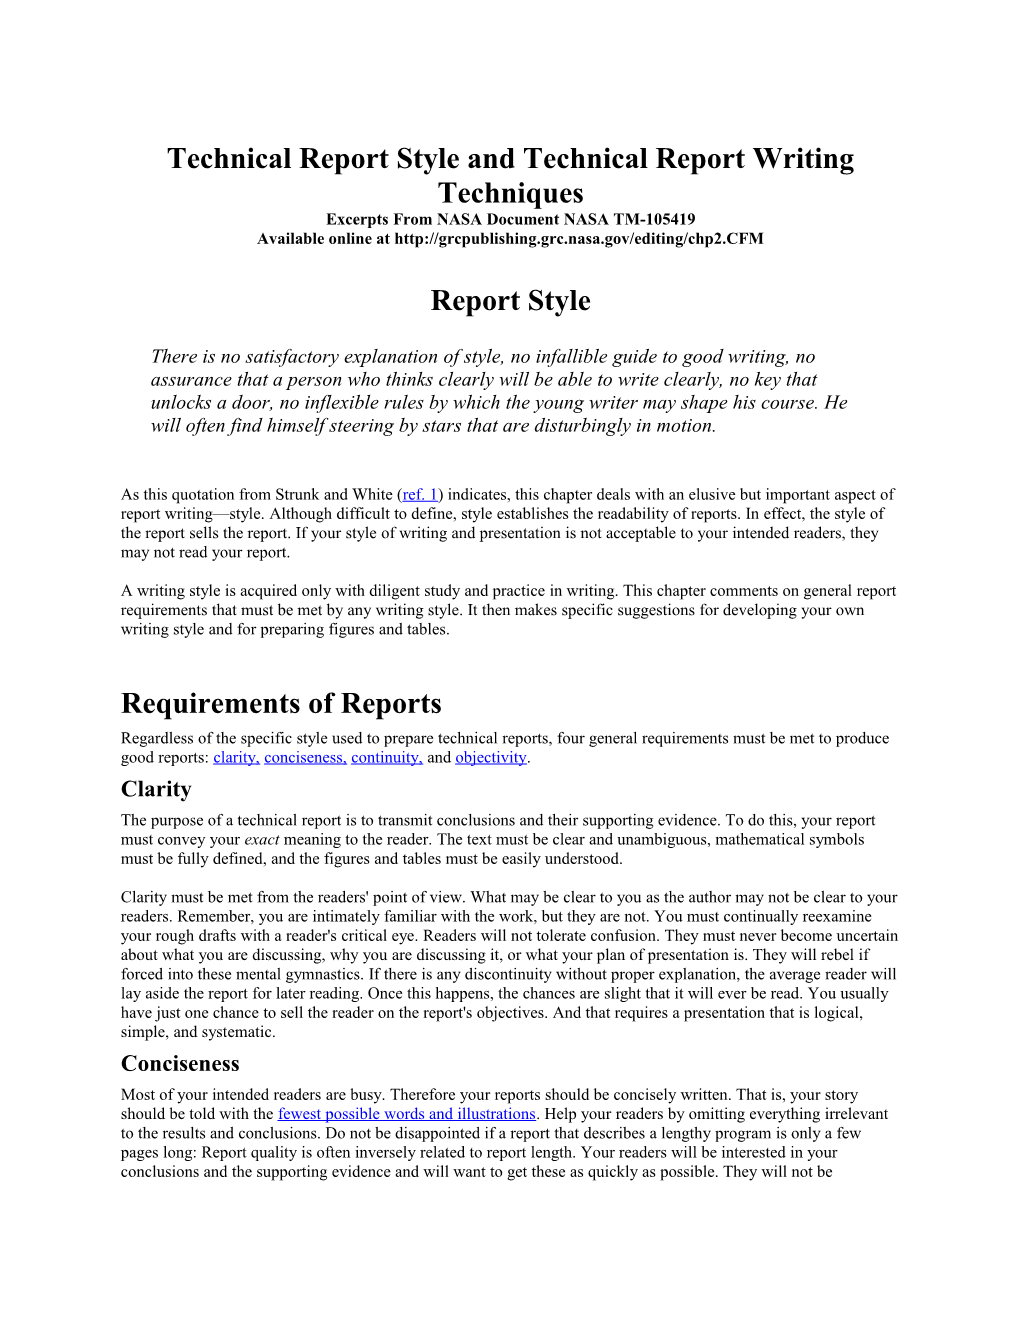 Technical Report Style and Technical Report Writing Techniques